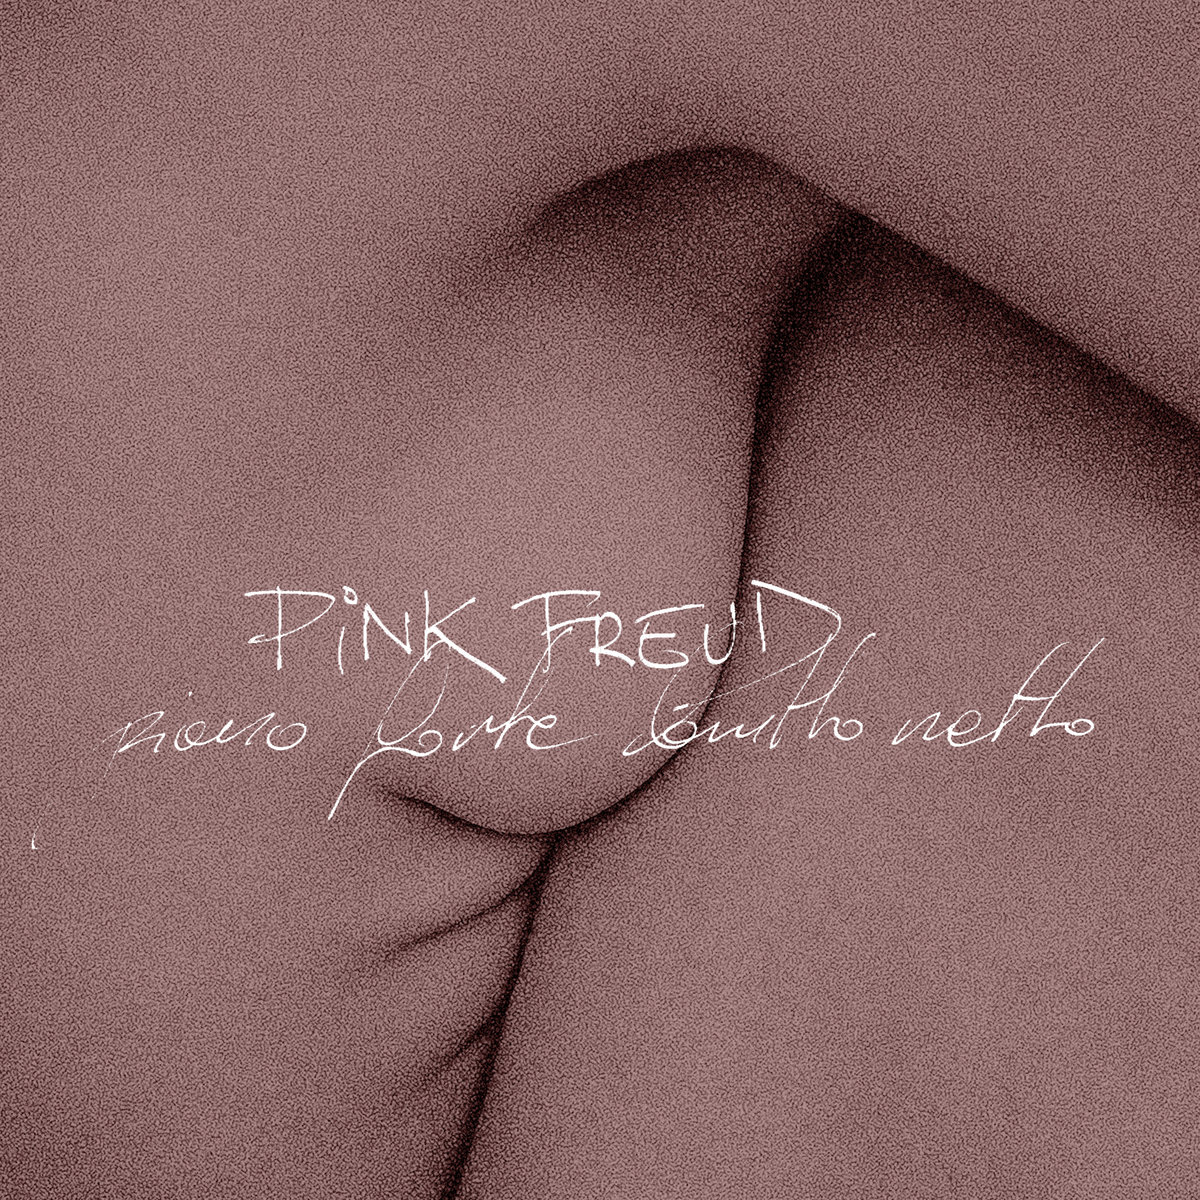 Pink Froyd - Piano Forte Brutto Netto